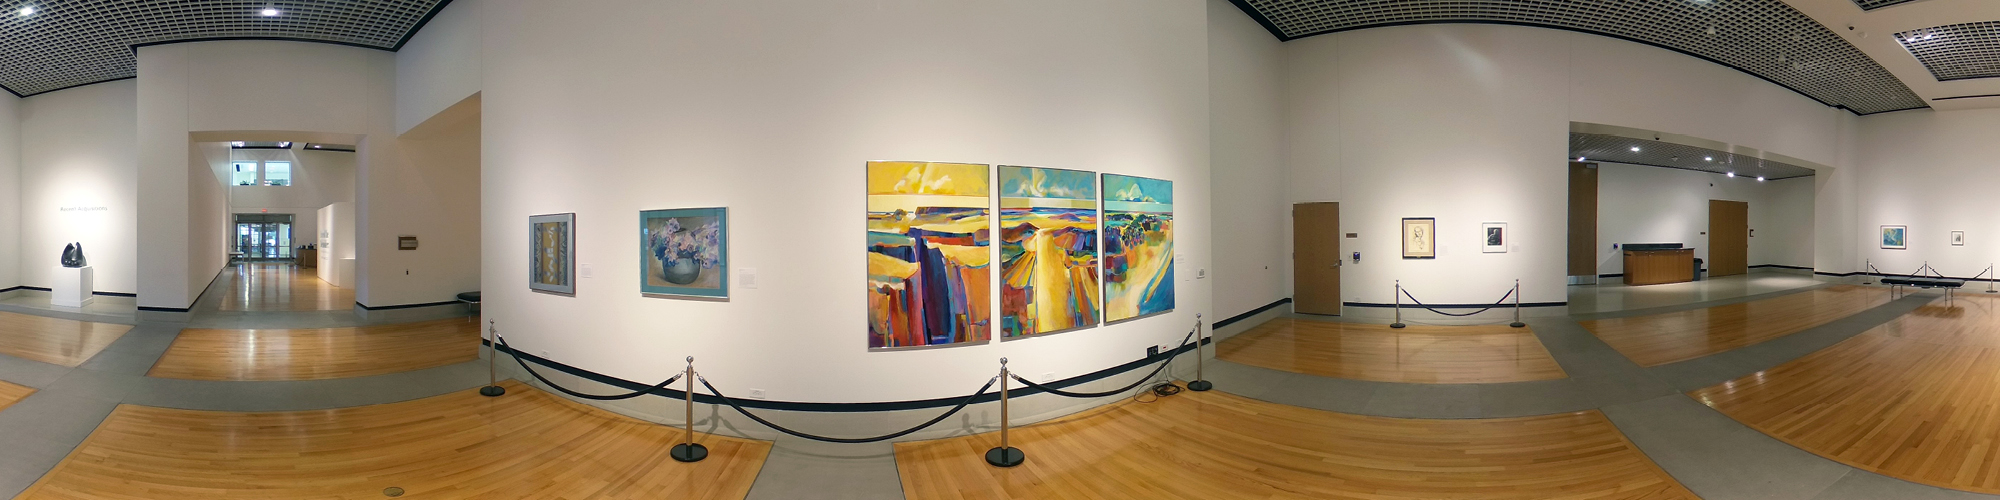 360 degree view of the interior of an art gallery. Colorful paintings hang on the wall at a distance and there is a sculpture on a pedestal on the far left.